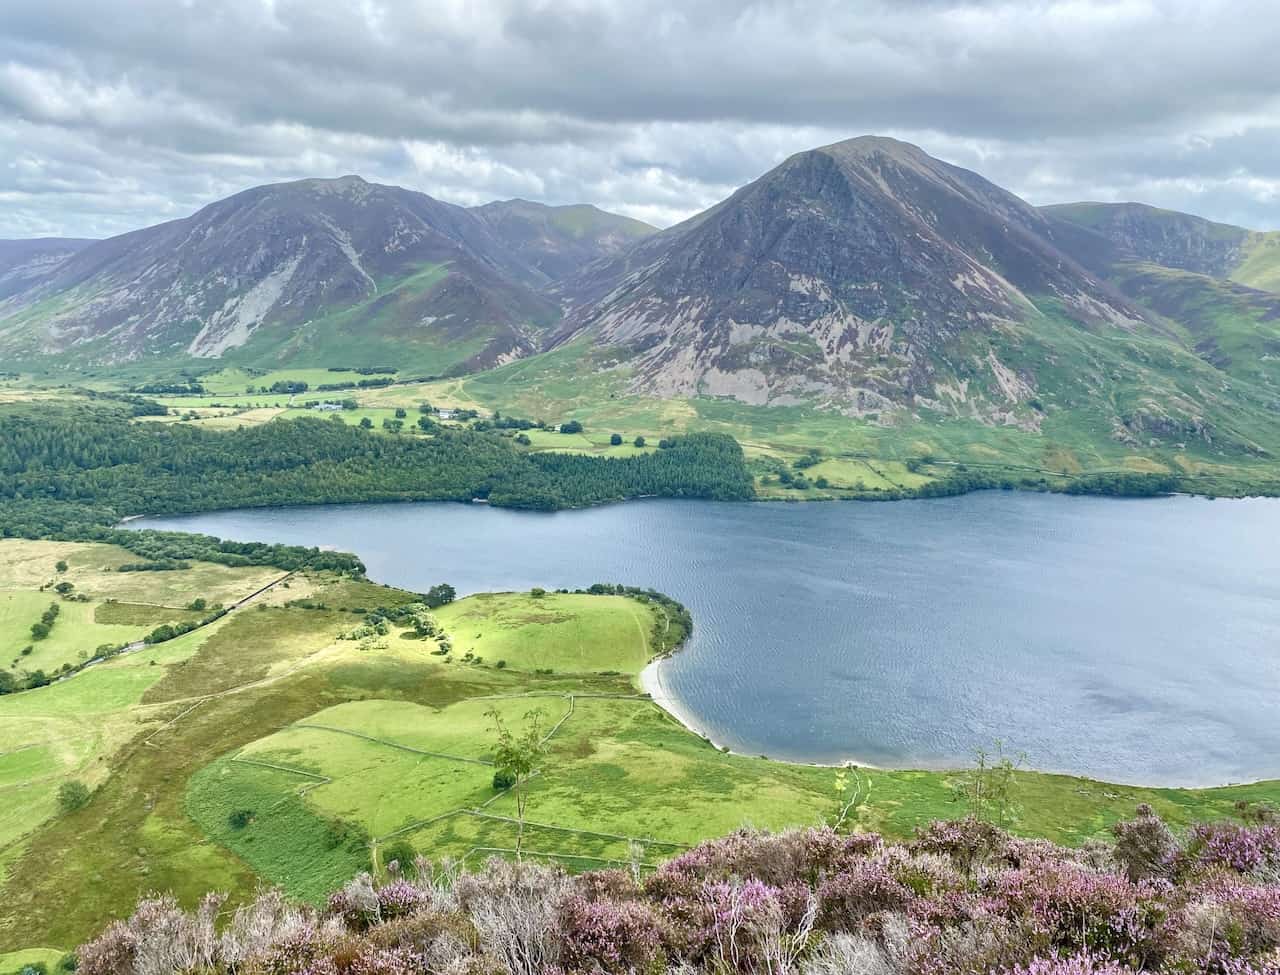 To the east is Crummock Water backed by Whiteside, Grasmoor and Whiteless Pike, with mountains such as Hopegill Head, Grisedale Pike and Robinson visible further away.